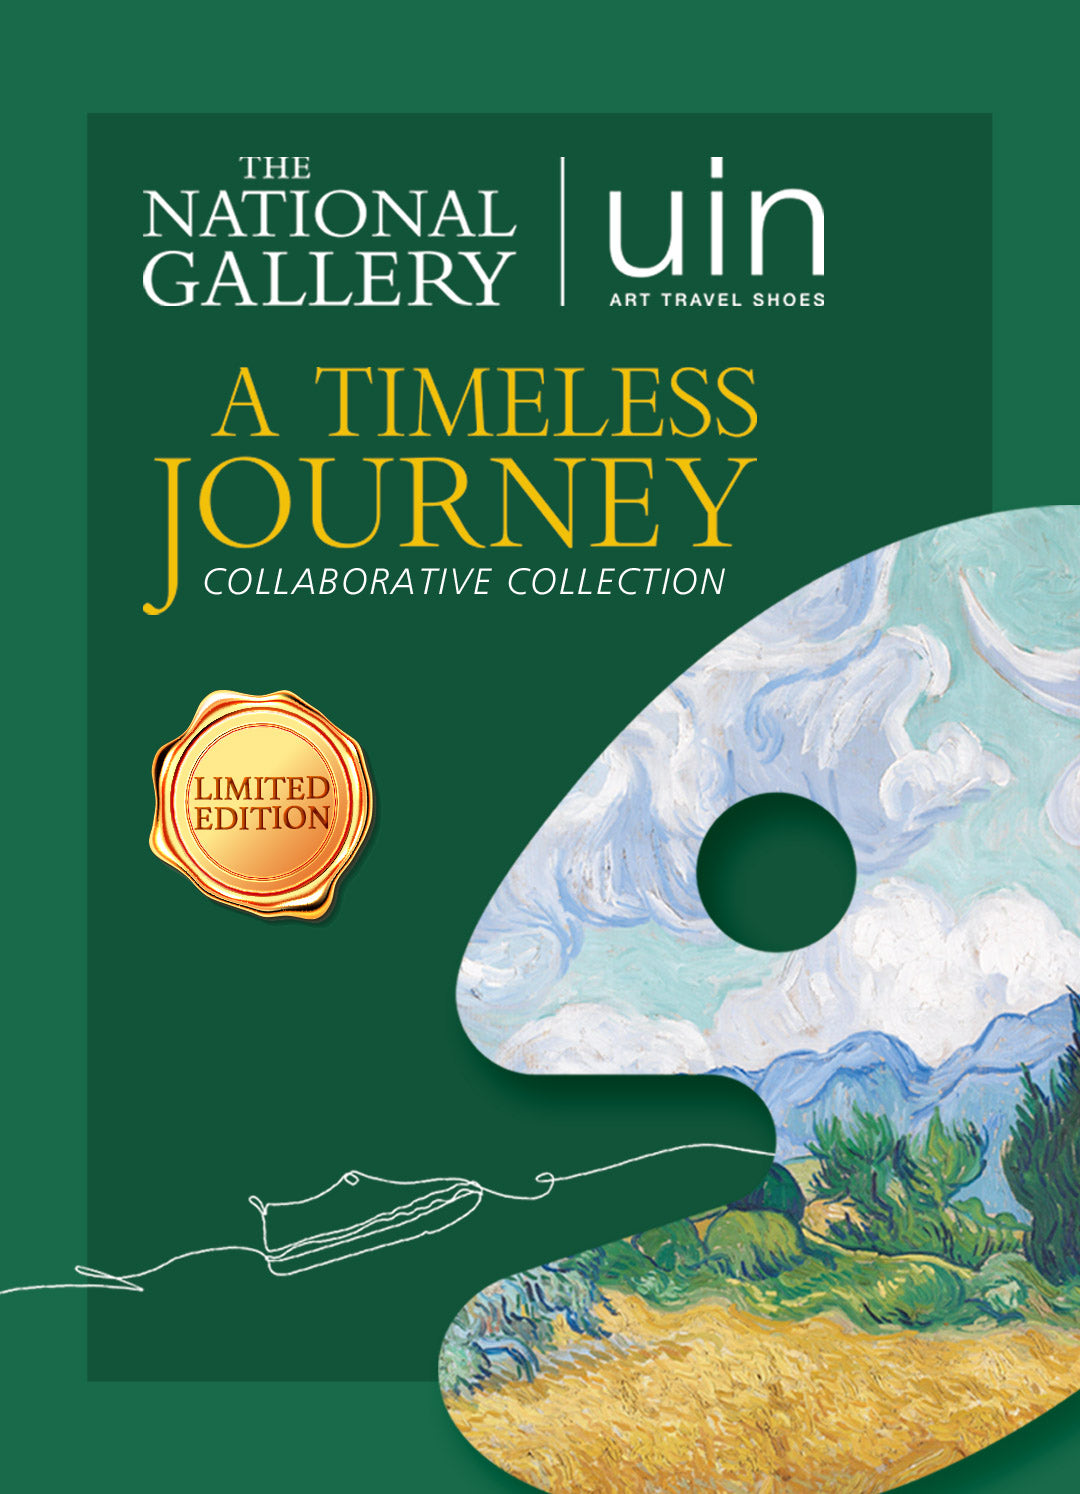 The National Gallery & uin Collaborative Collection